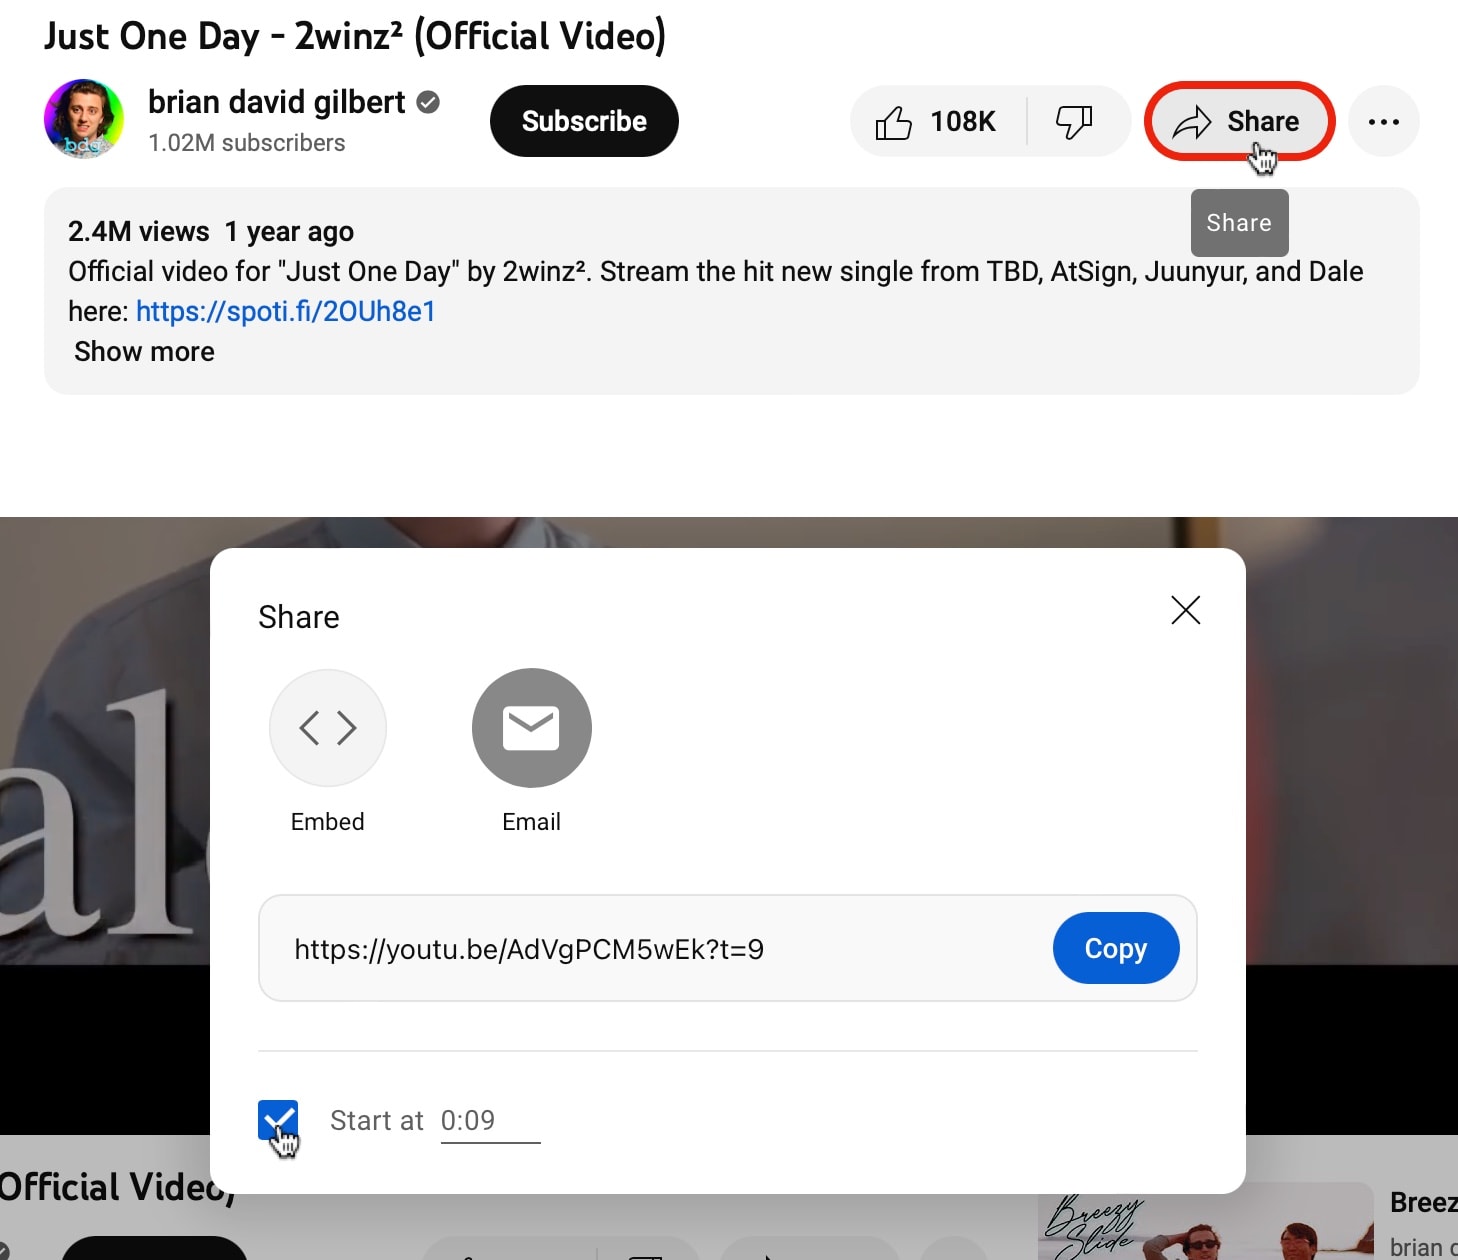 How To Share A YouTube Video At A Specific Start Time